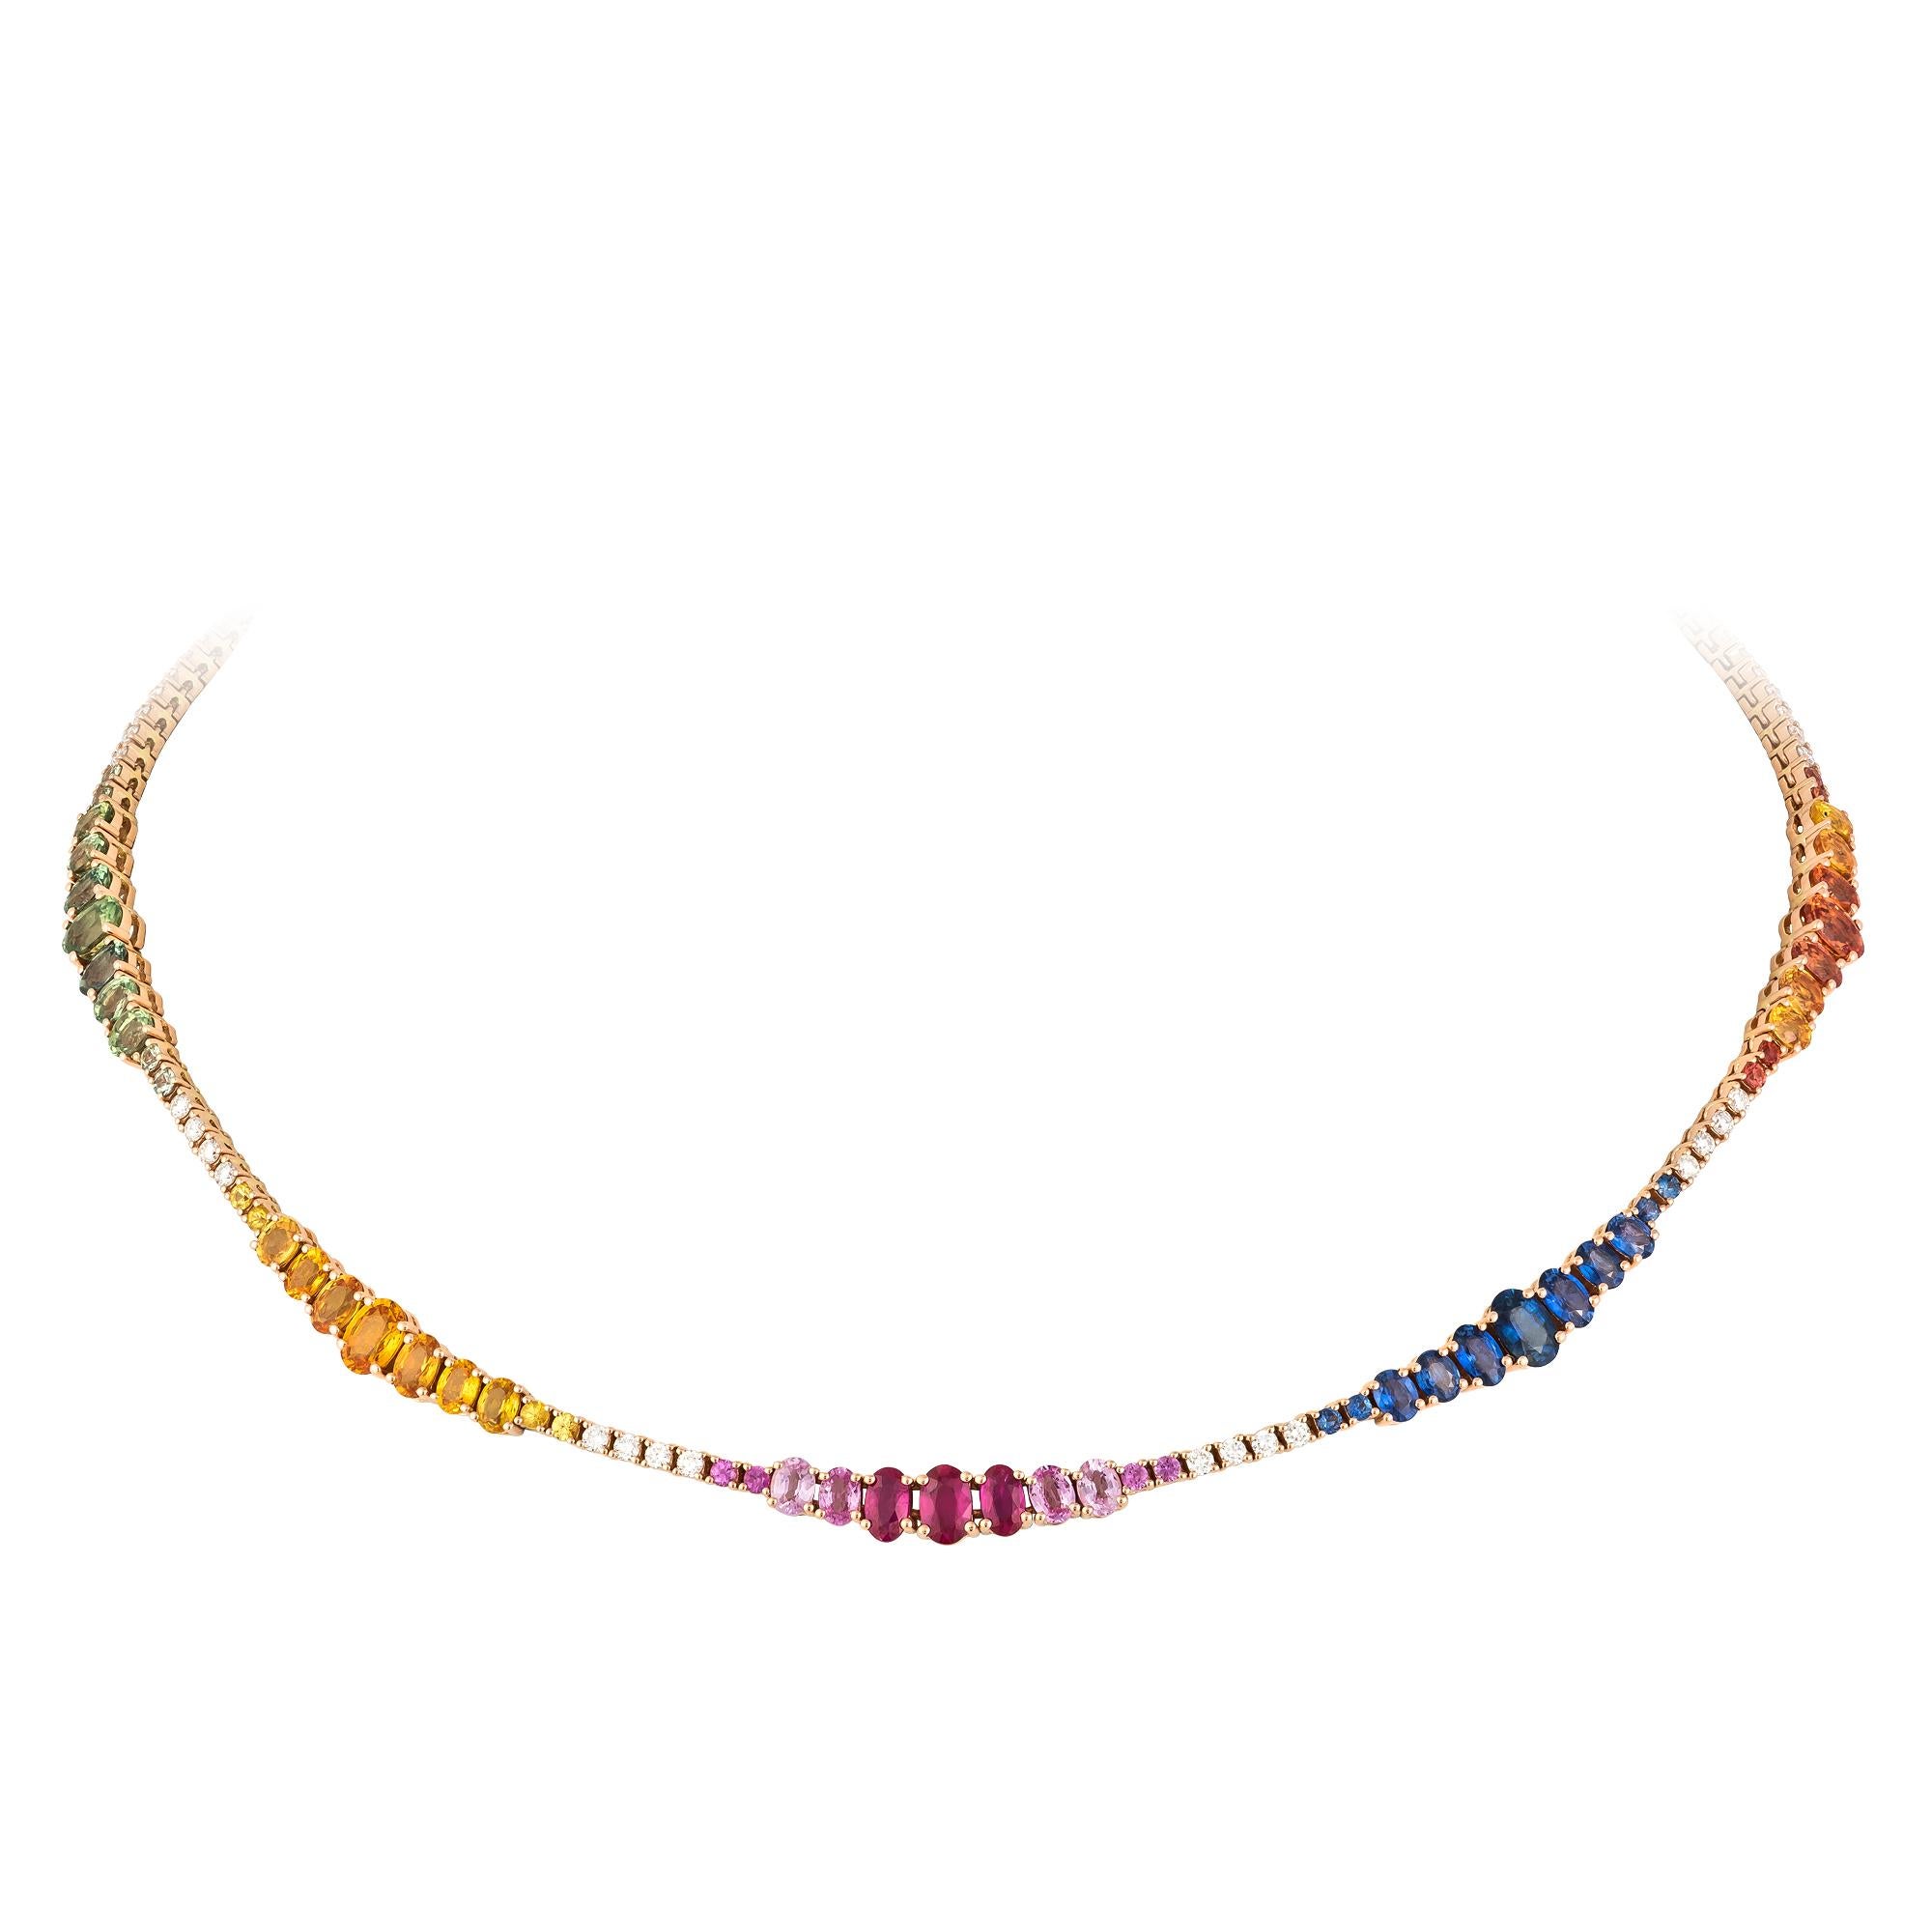 NECKLACE 18K Rose Gold 
Diamond 0.93 Cts/38 Pcs 
Multi Sapphire 11.35 Cts/52 Pcs 
Ruby 1.11 Cts/3 Pcs

With a heritage of ancient fine Swiss jewelry traditions, NATKINA is a Geneva based jewellery brand, which creates modern jewellery masterpieces